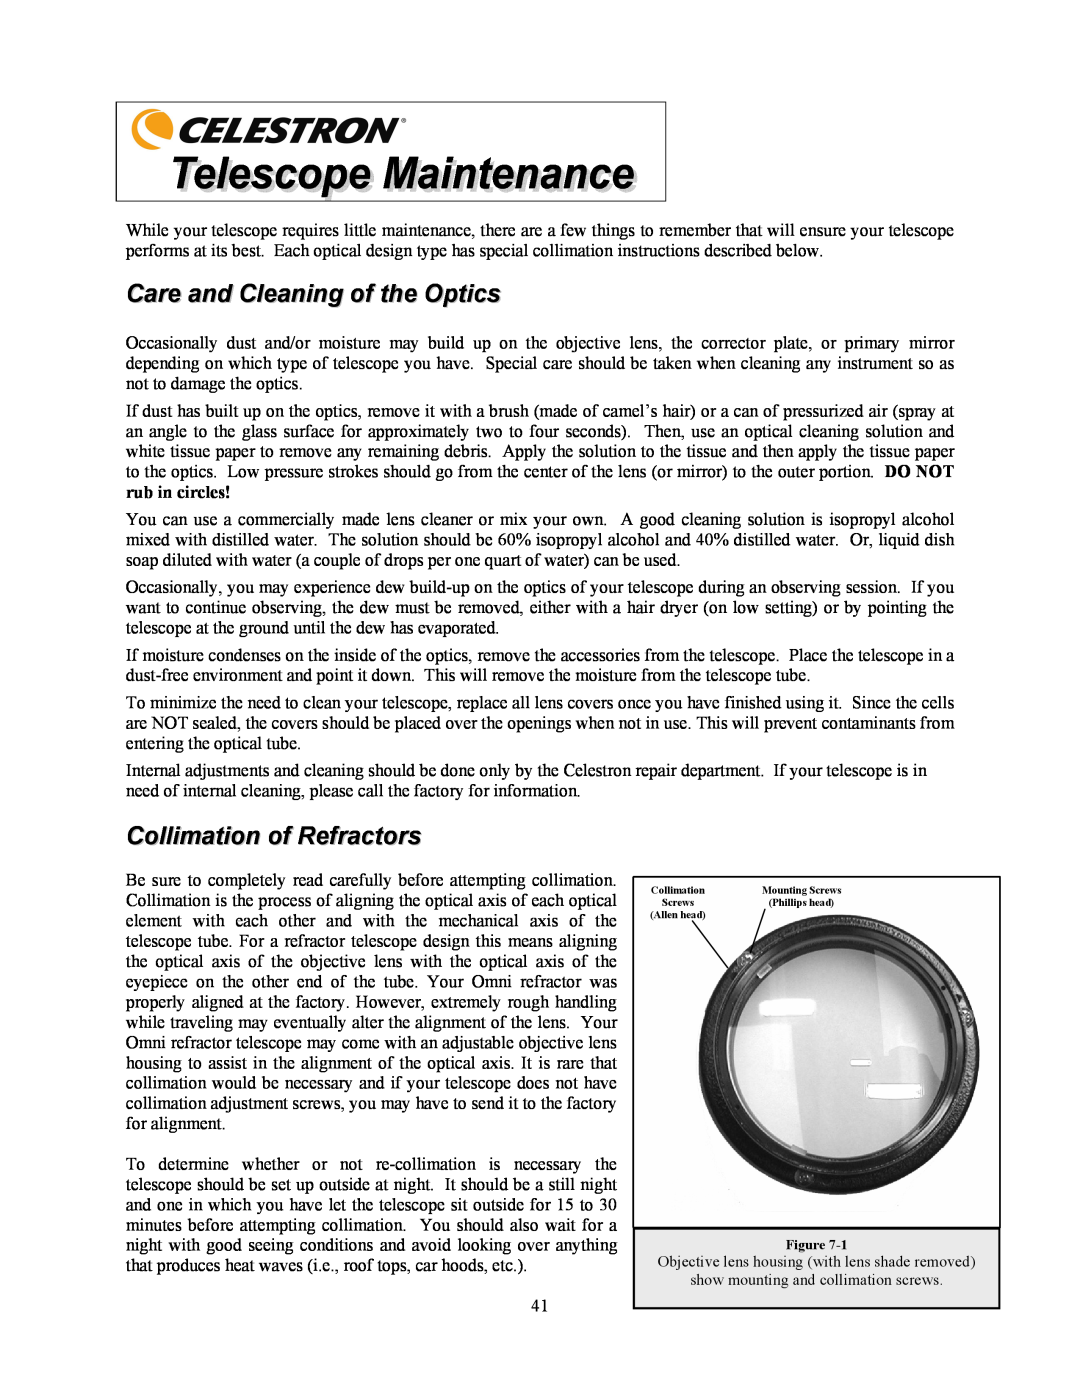 Celestron OMNI XLT 102 manual Care and Cleaning of the Optics, Collimation of Refractors, rub in circles 